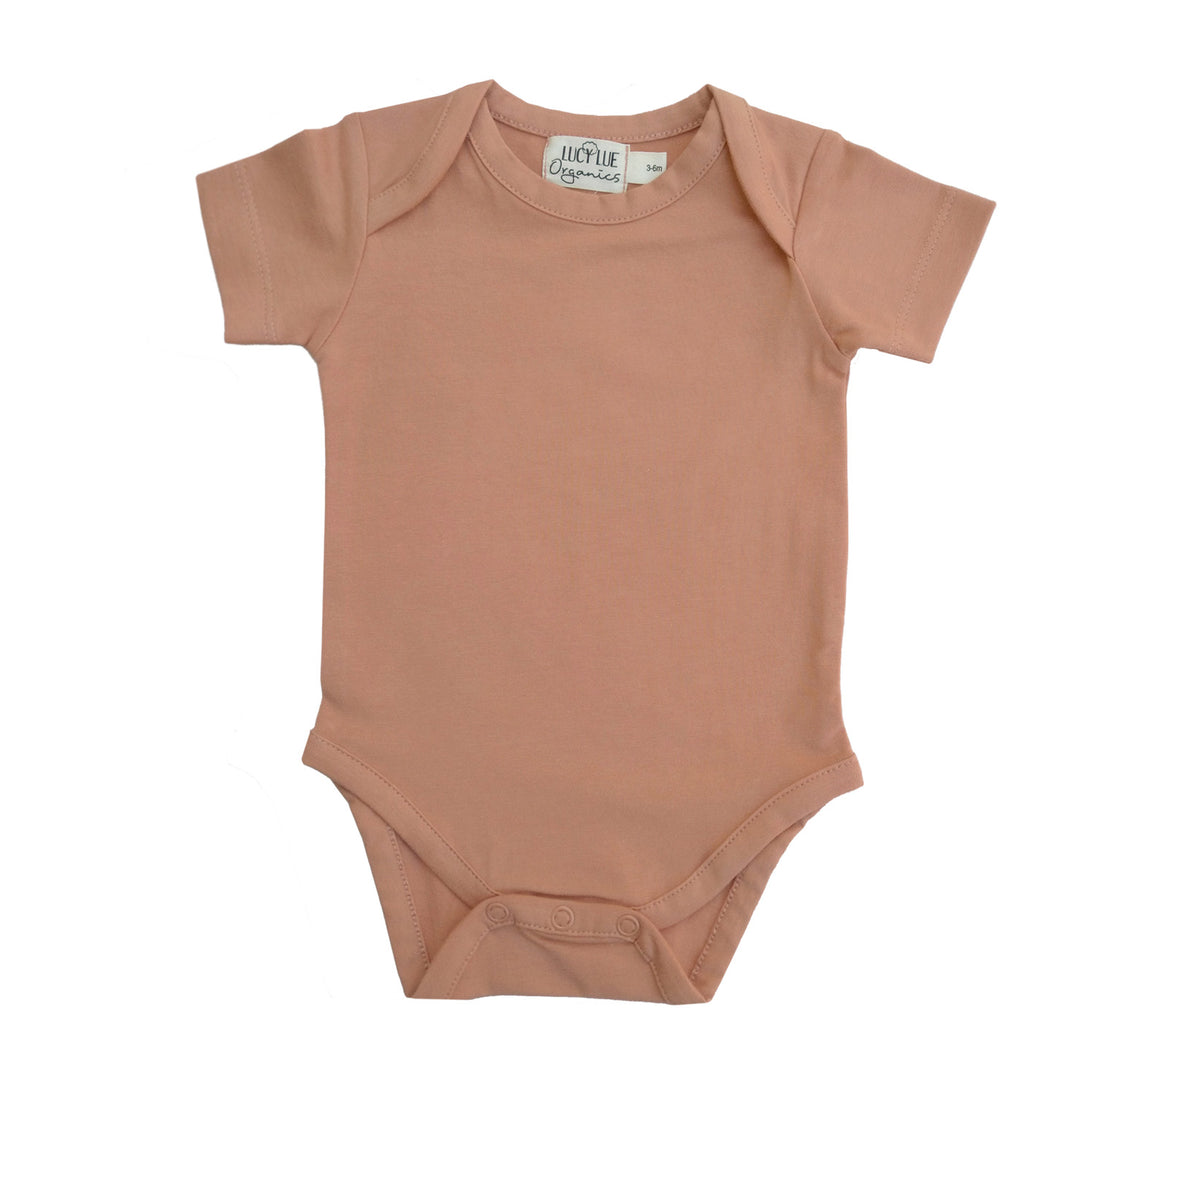 Lucy Lue Organics short sleeve baby bodysuit. Organic newborn clothes. Baby clothing. Gender neutral newborn clothes. Baby romper. Organic baby bodysuits. modern organic baby clothes. newborn clothes. sustainable baby clothes. Soft baby clothes. solid color baby clothes